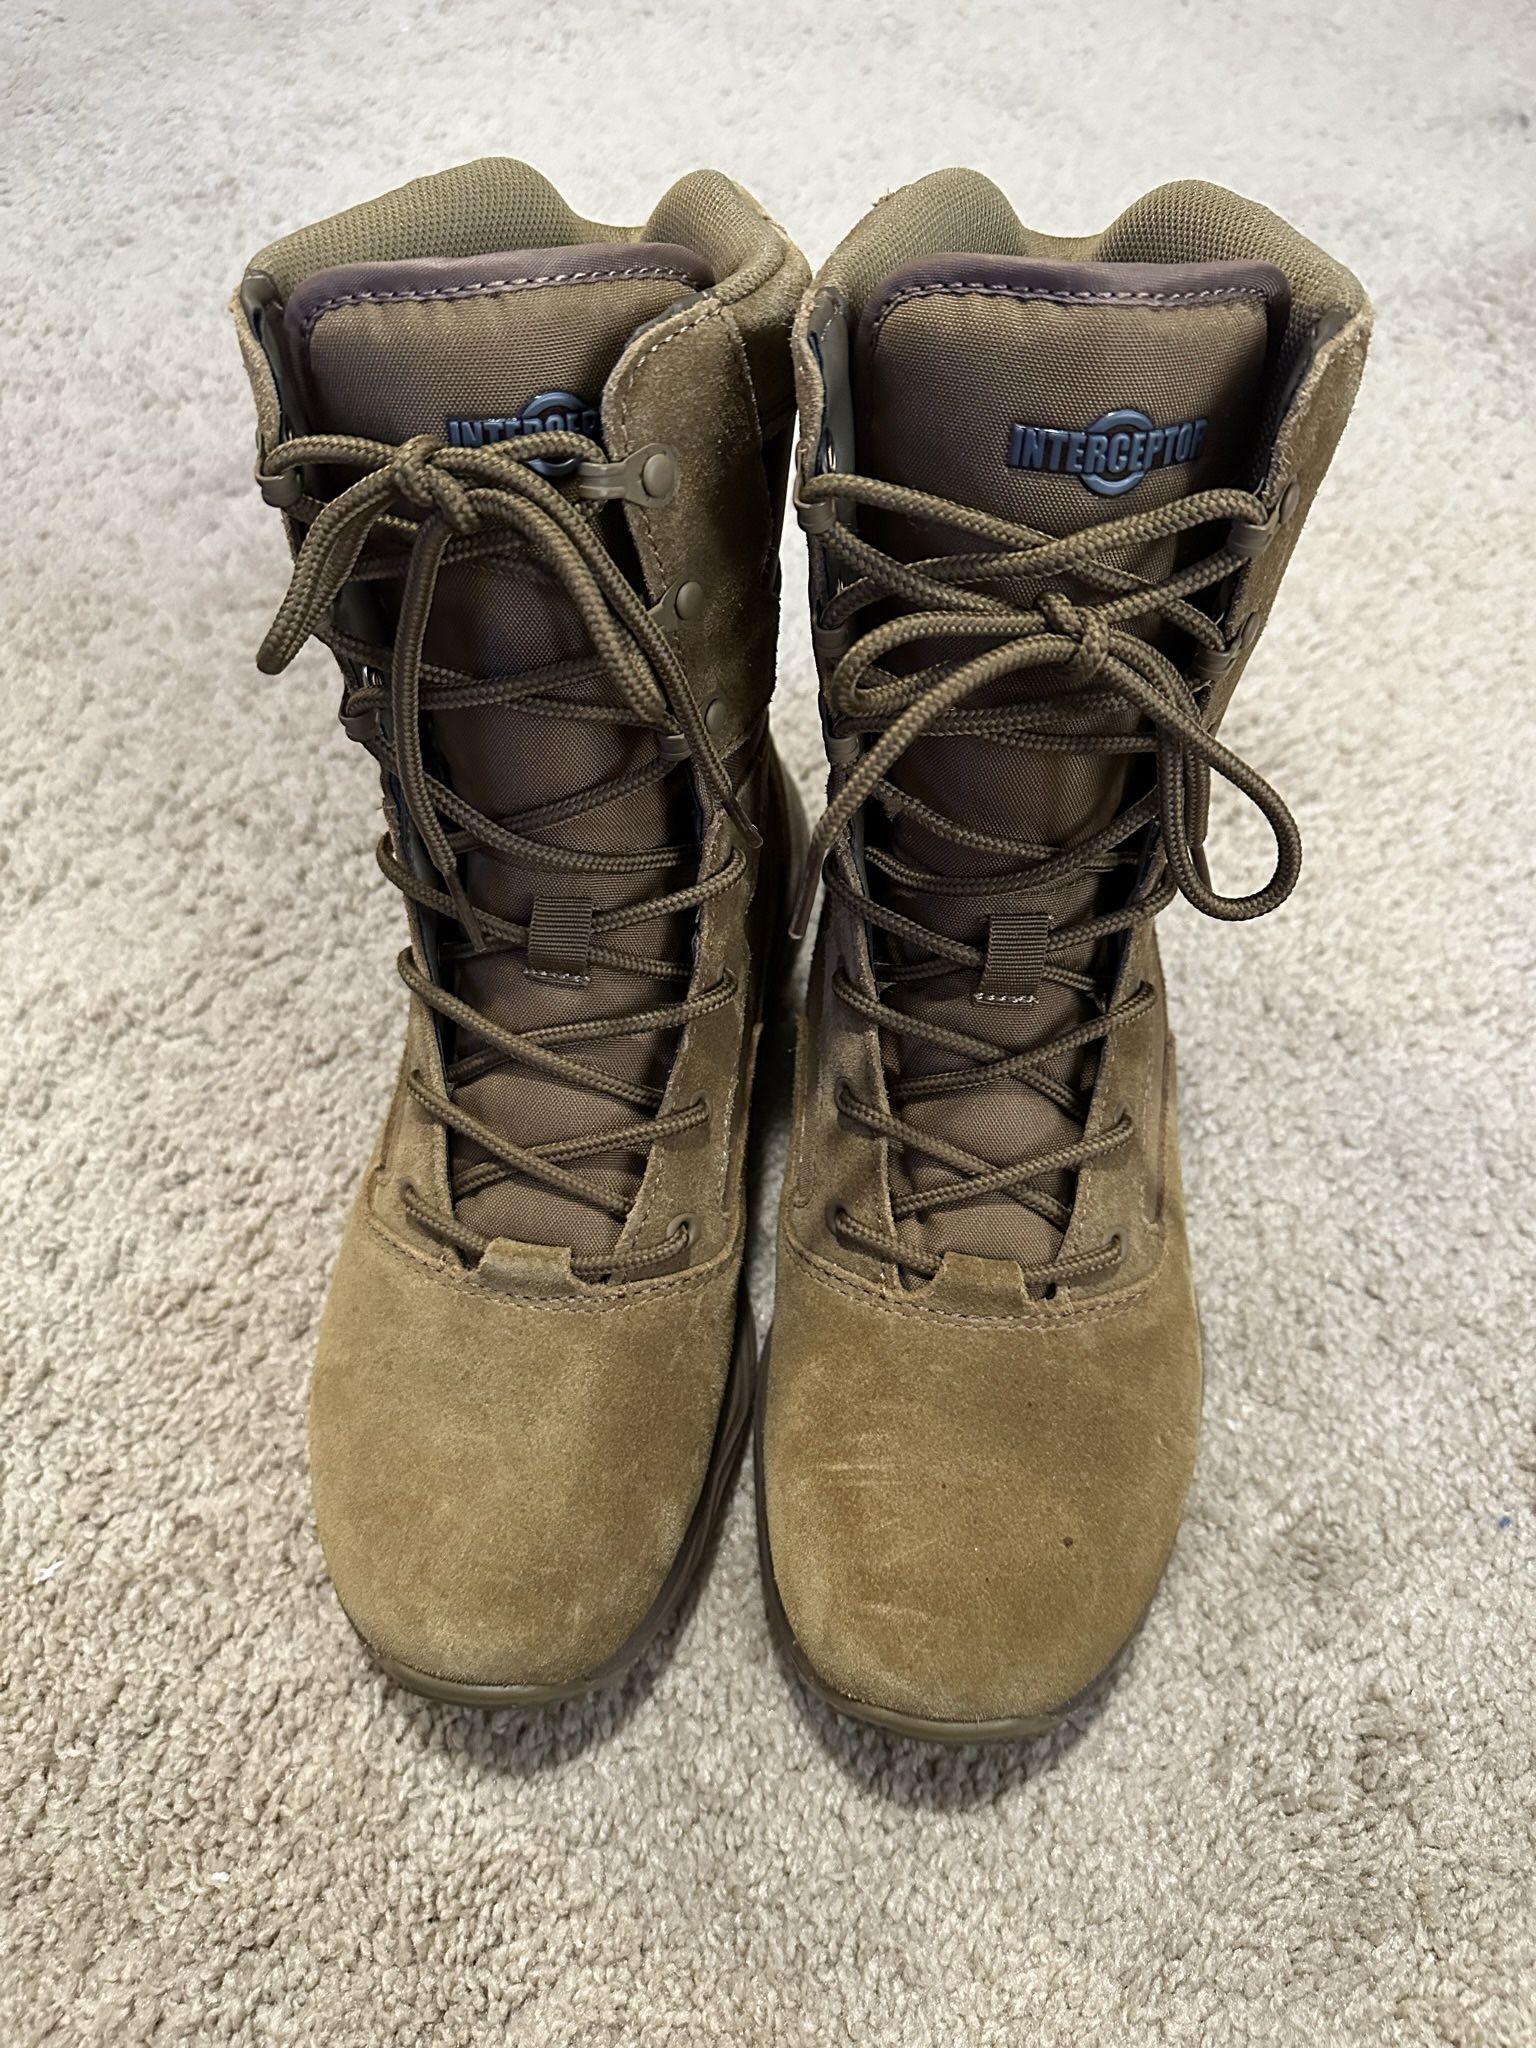 Men’s Size 7.5 Boots Never Worn 